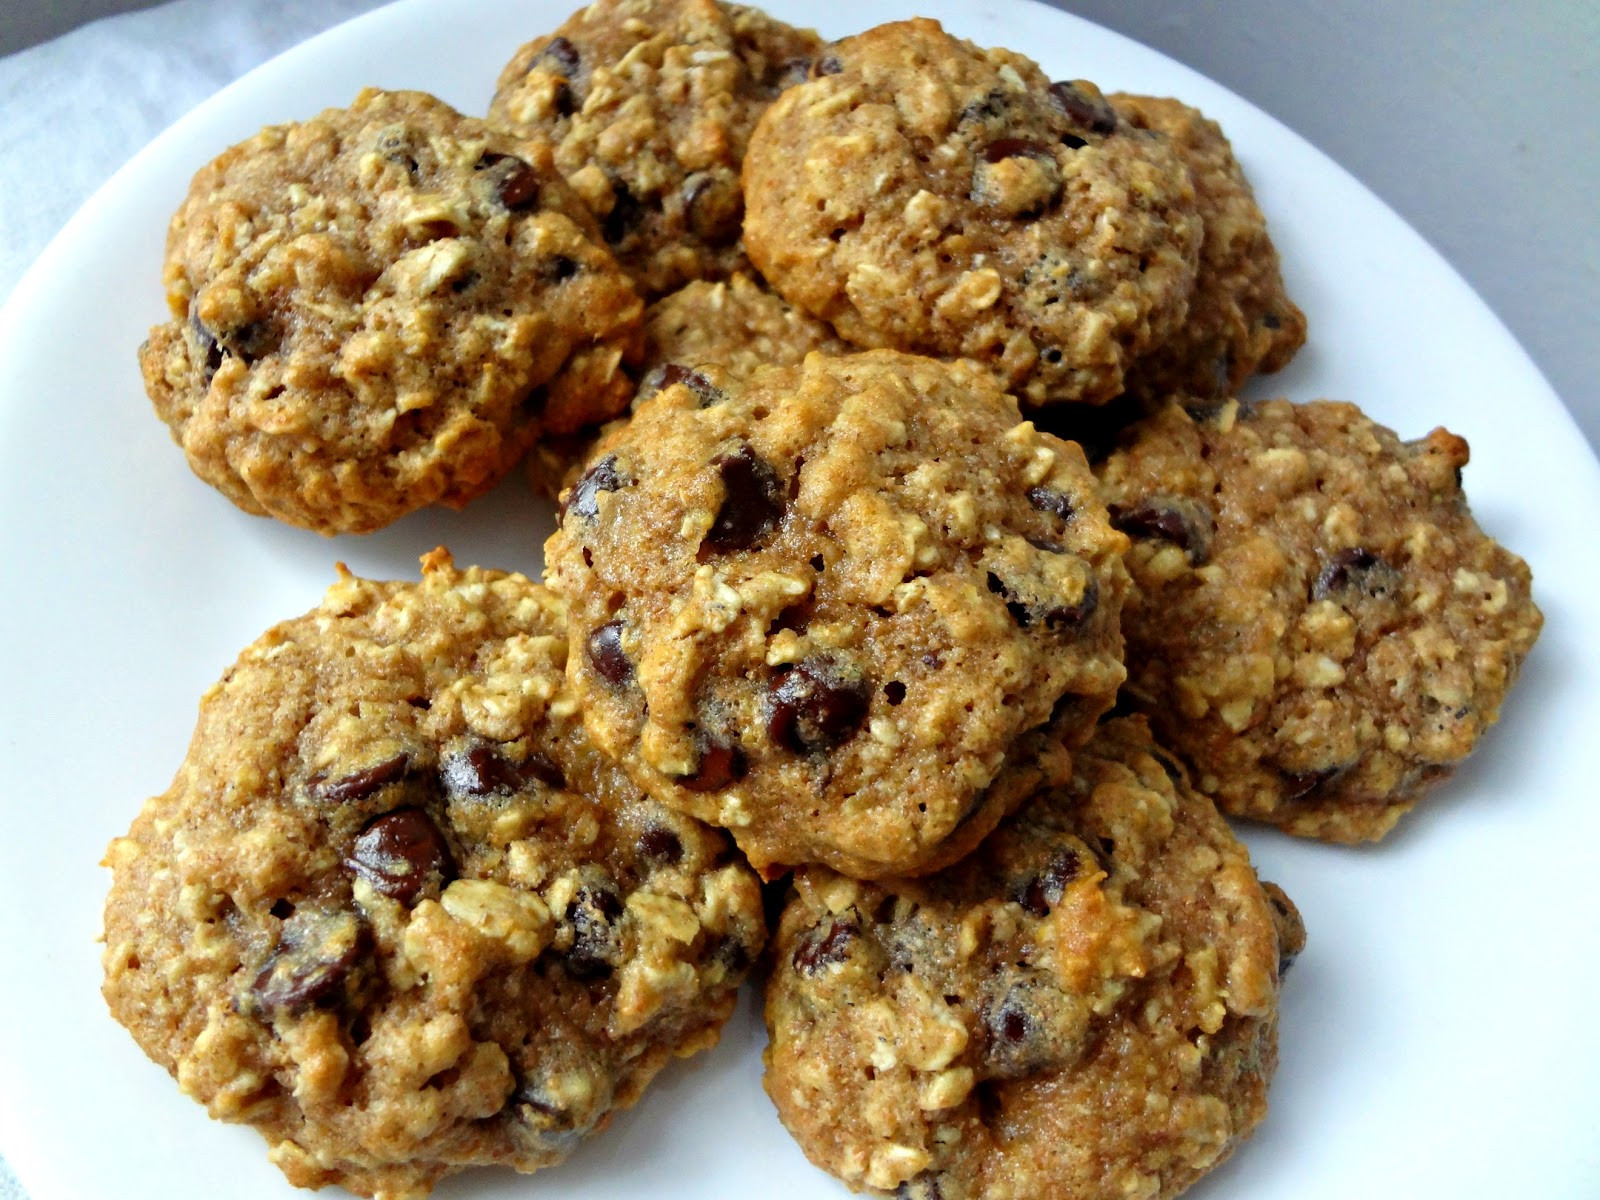 Chocolate Oatmeal Cookies Healthy
 The Cooking Actress Healthy Oatmeal Chocolate Chip Cookies